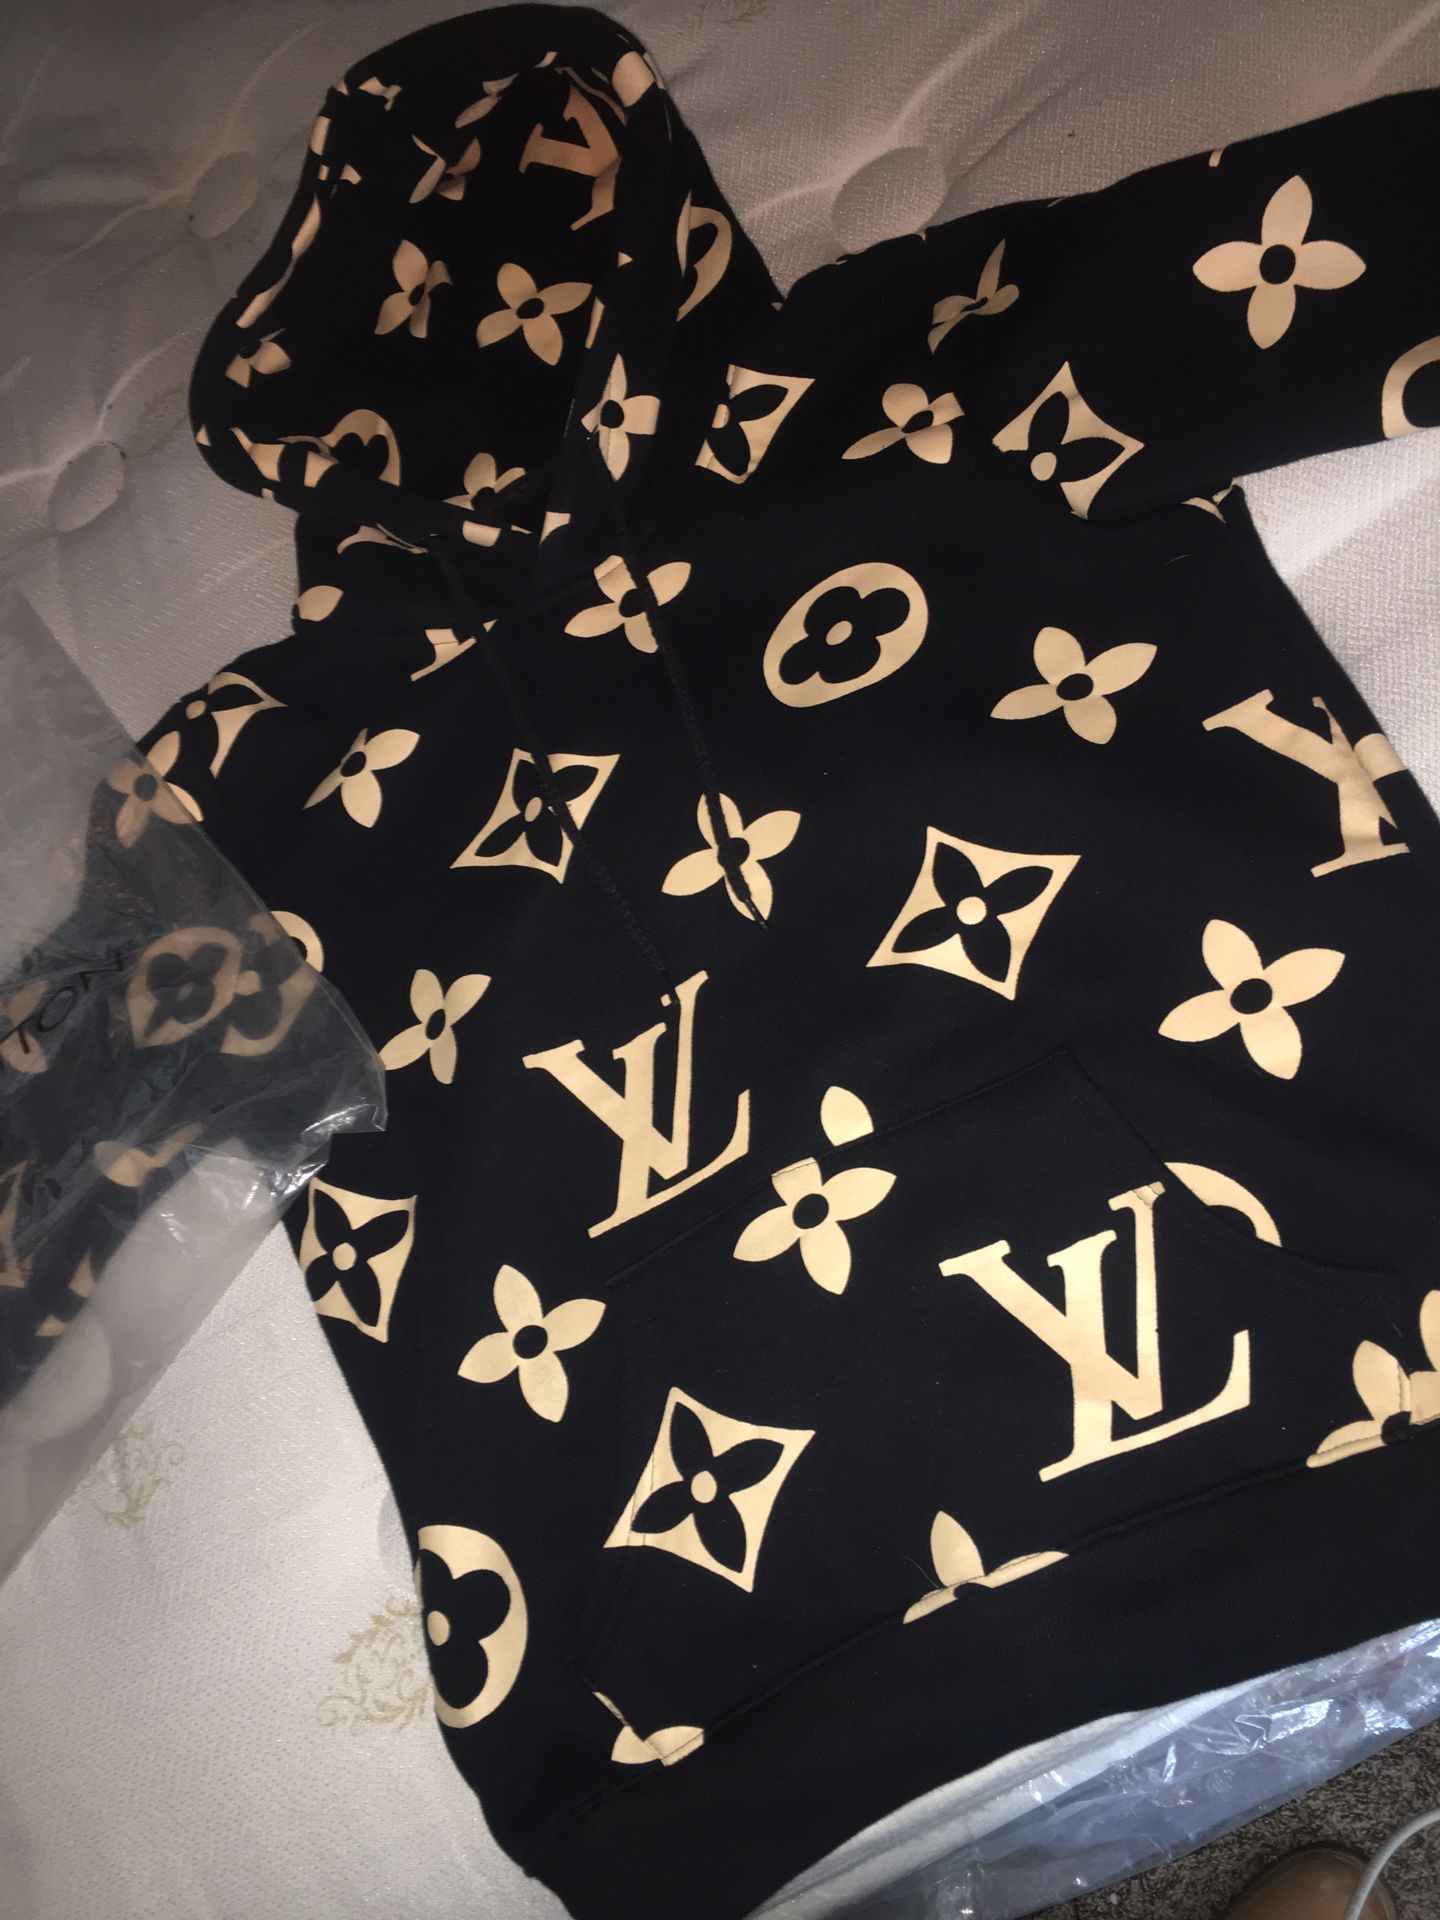 Louis Vuitton hoodie for ladies brandnew size M, never worn ! And never seen before so get it while you can